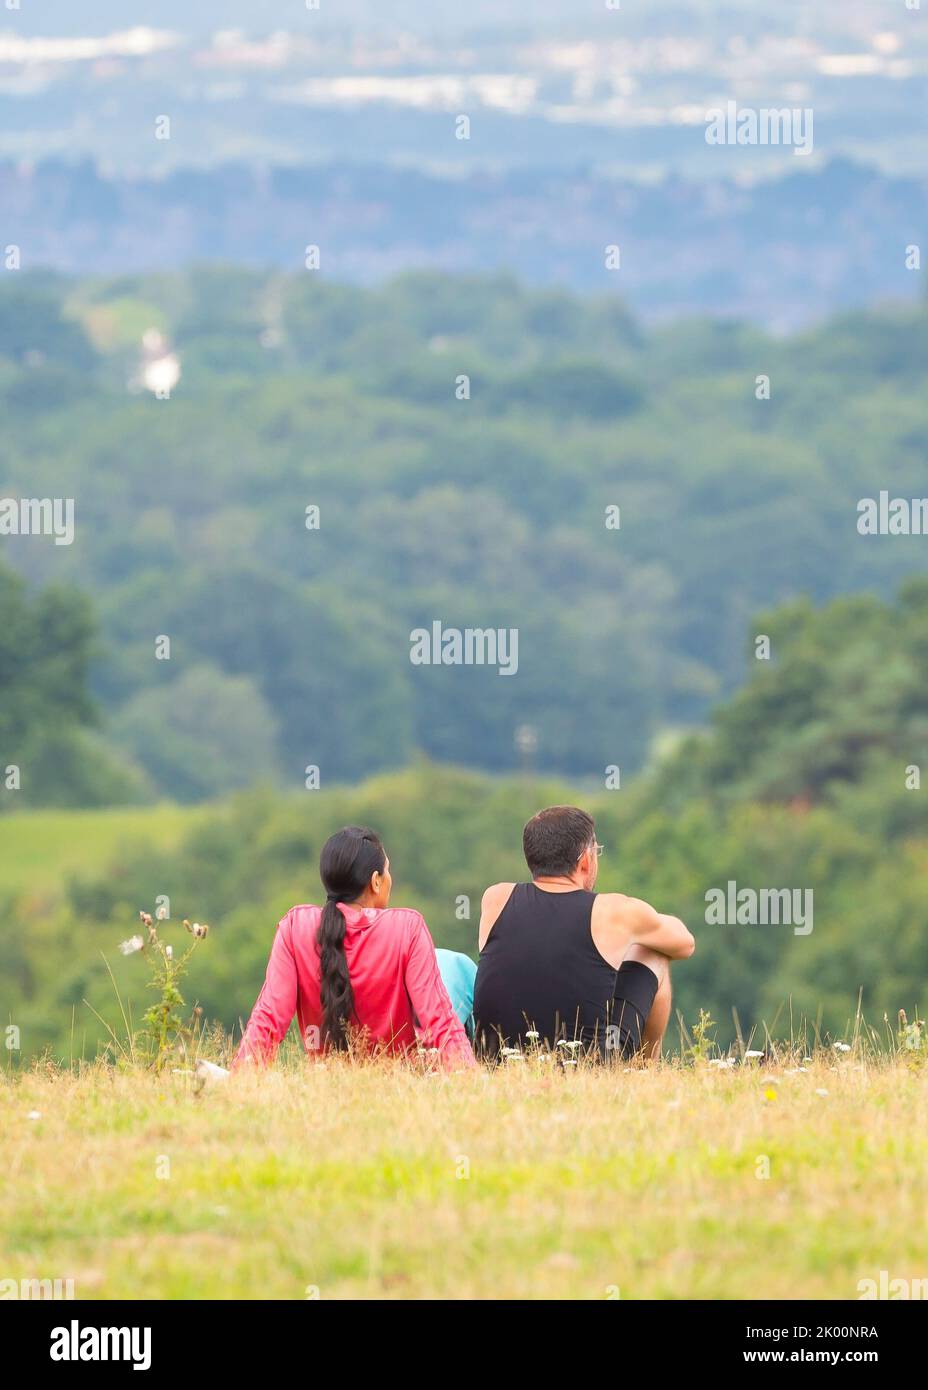 Rear/back view of man and woman sitting isolated together on rural hillside looking at the view of a town in the distance. Stock Photo